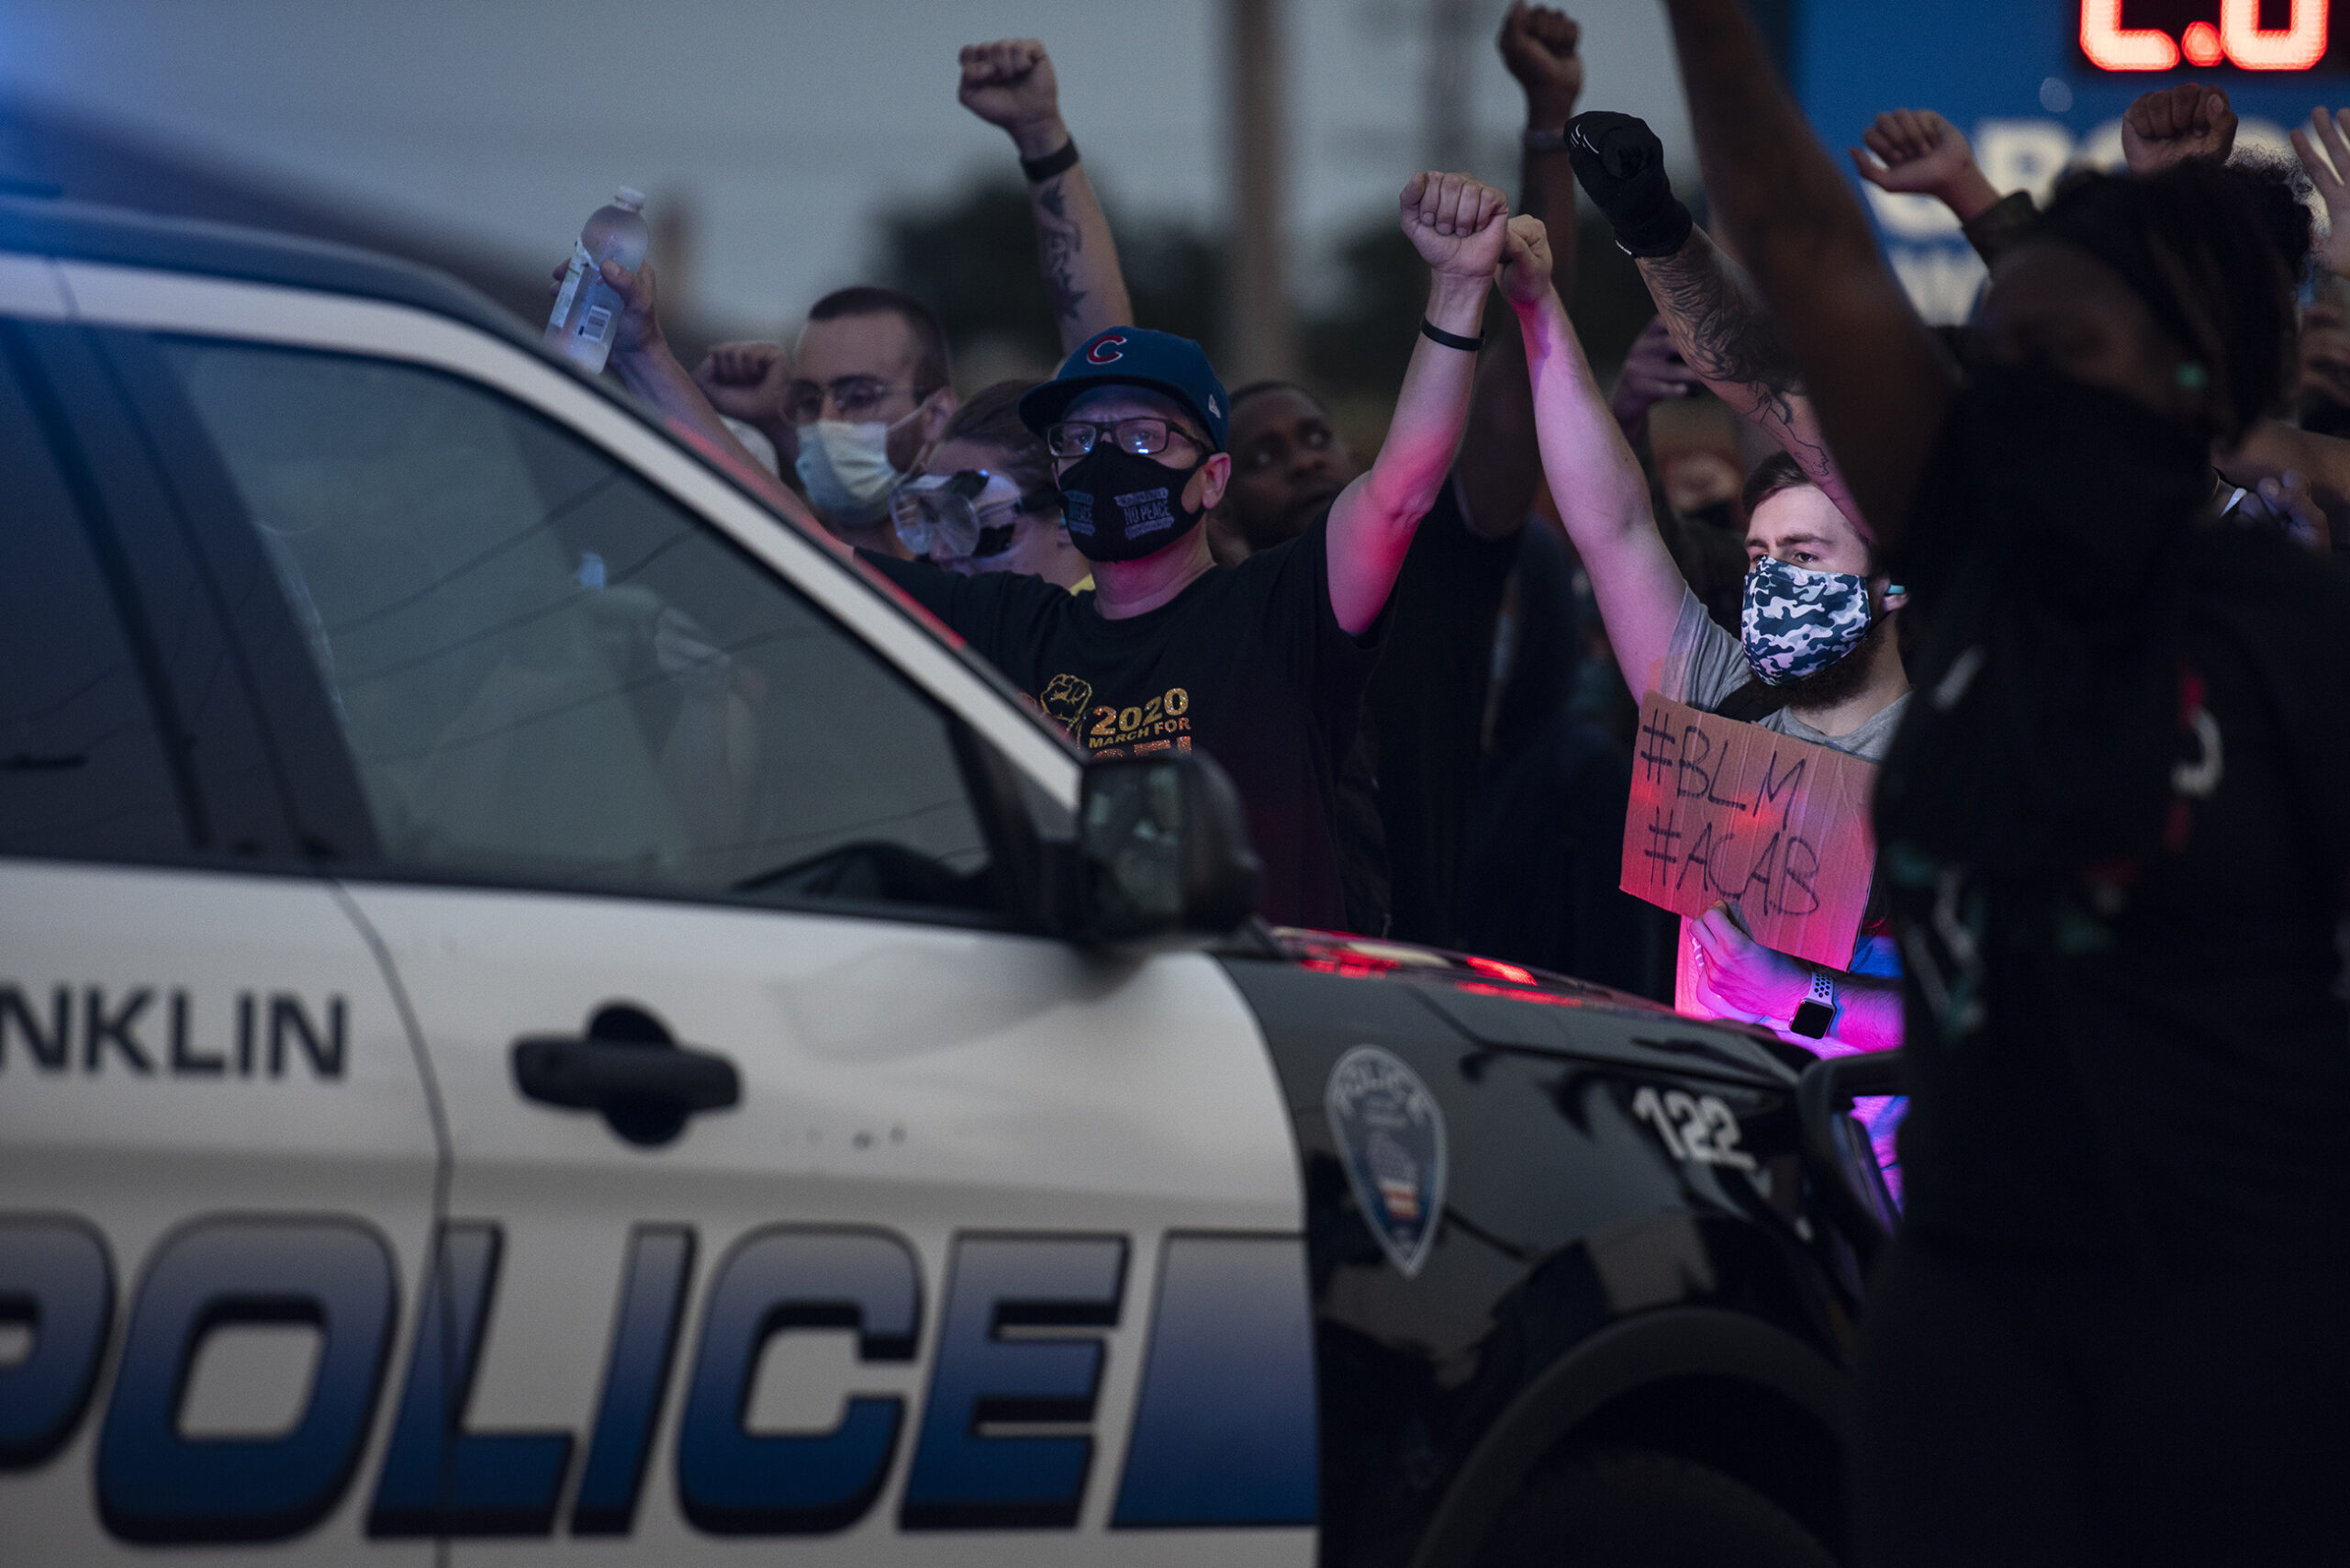 Protesters are illuminated by police lights as they raise their fists